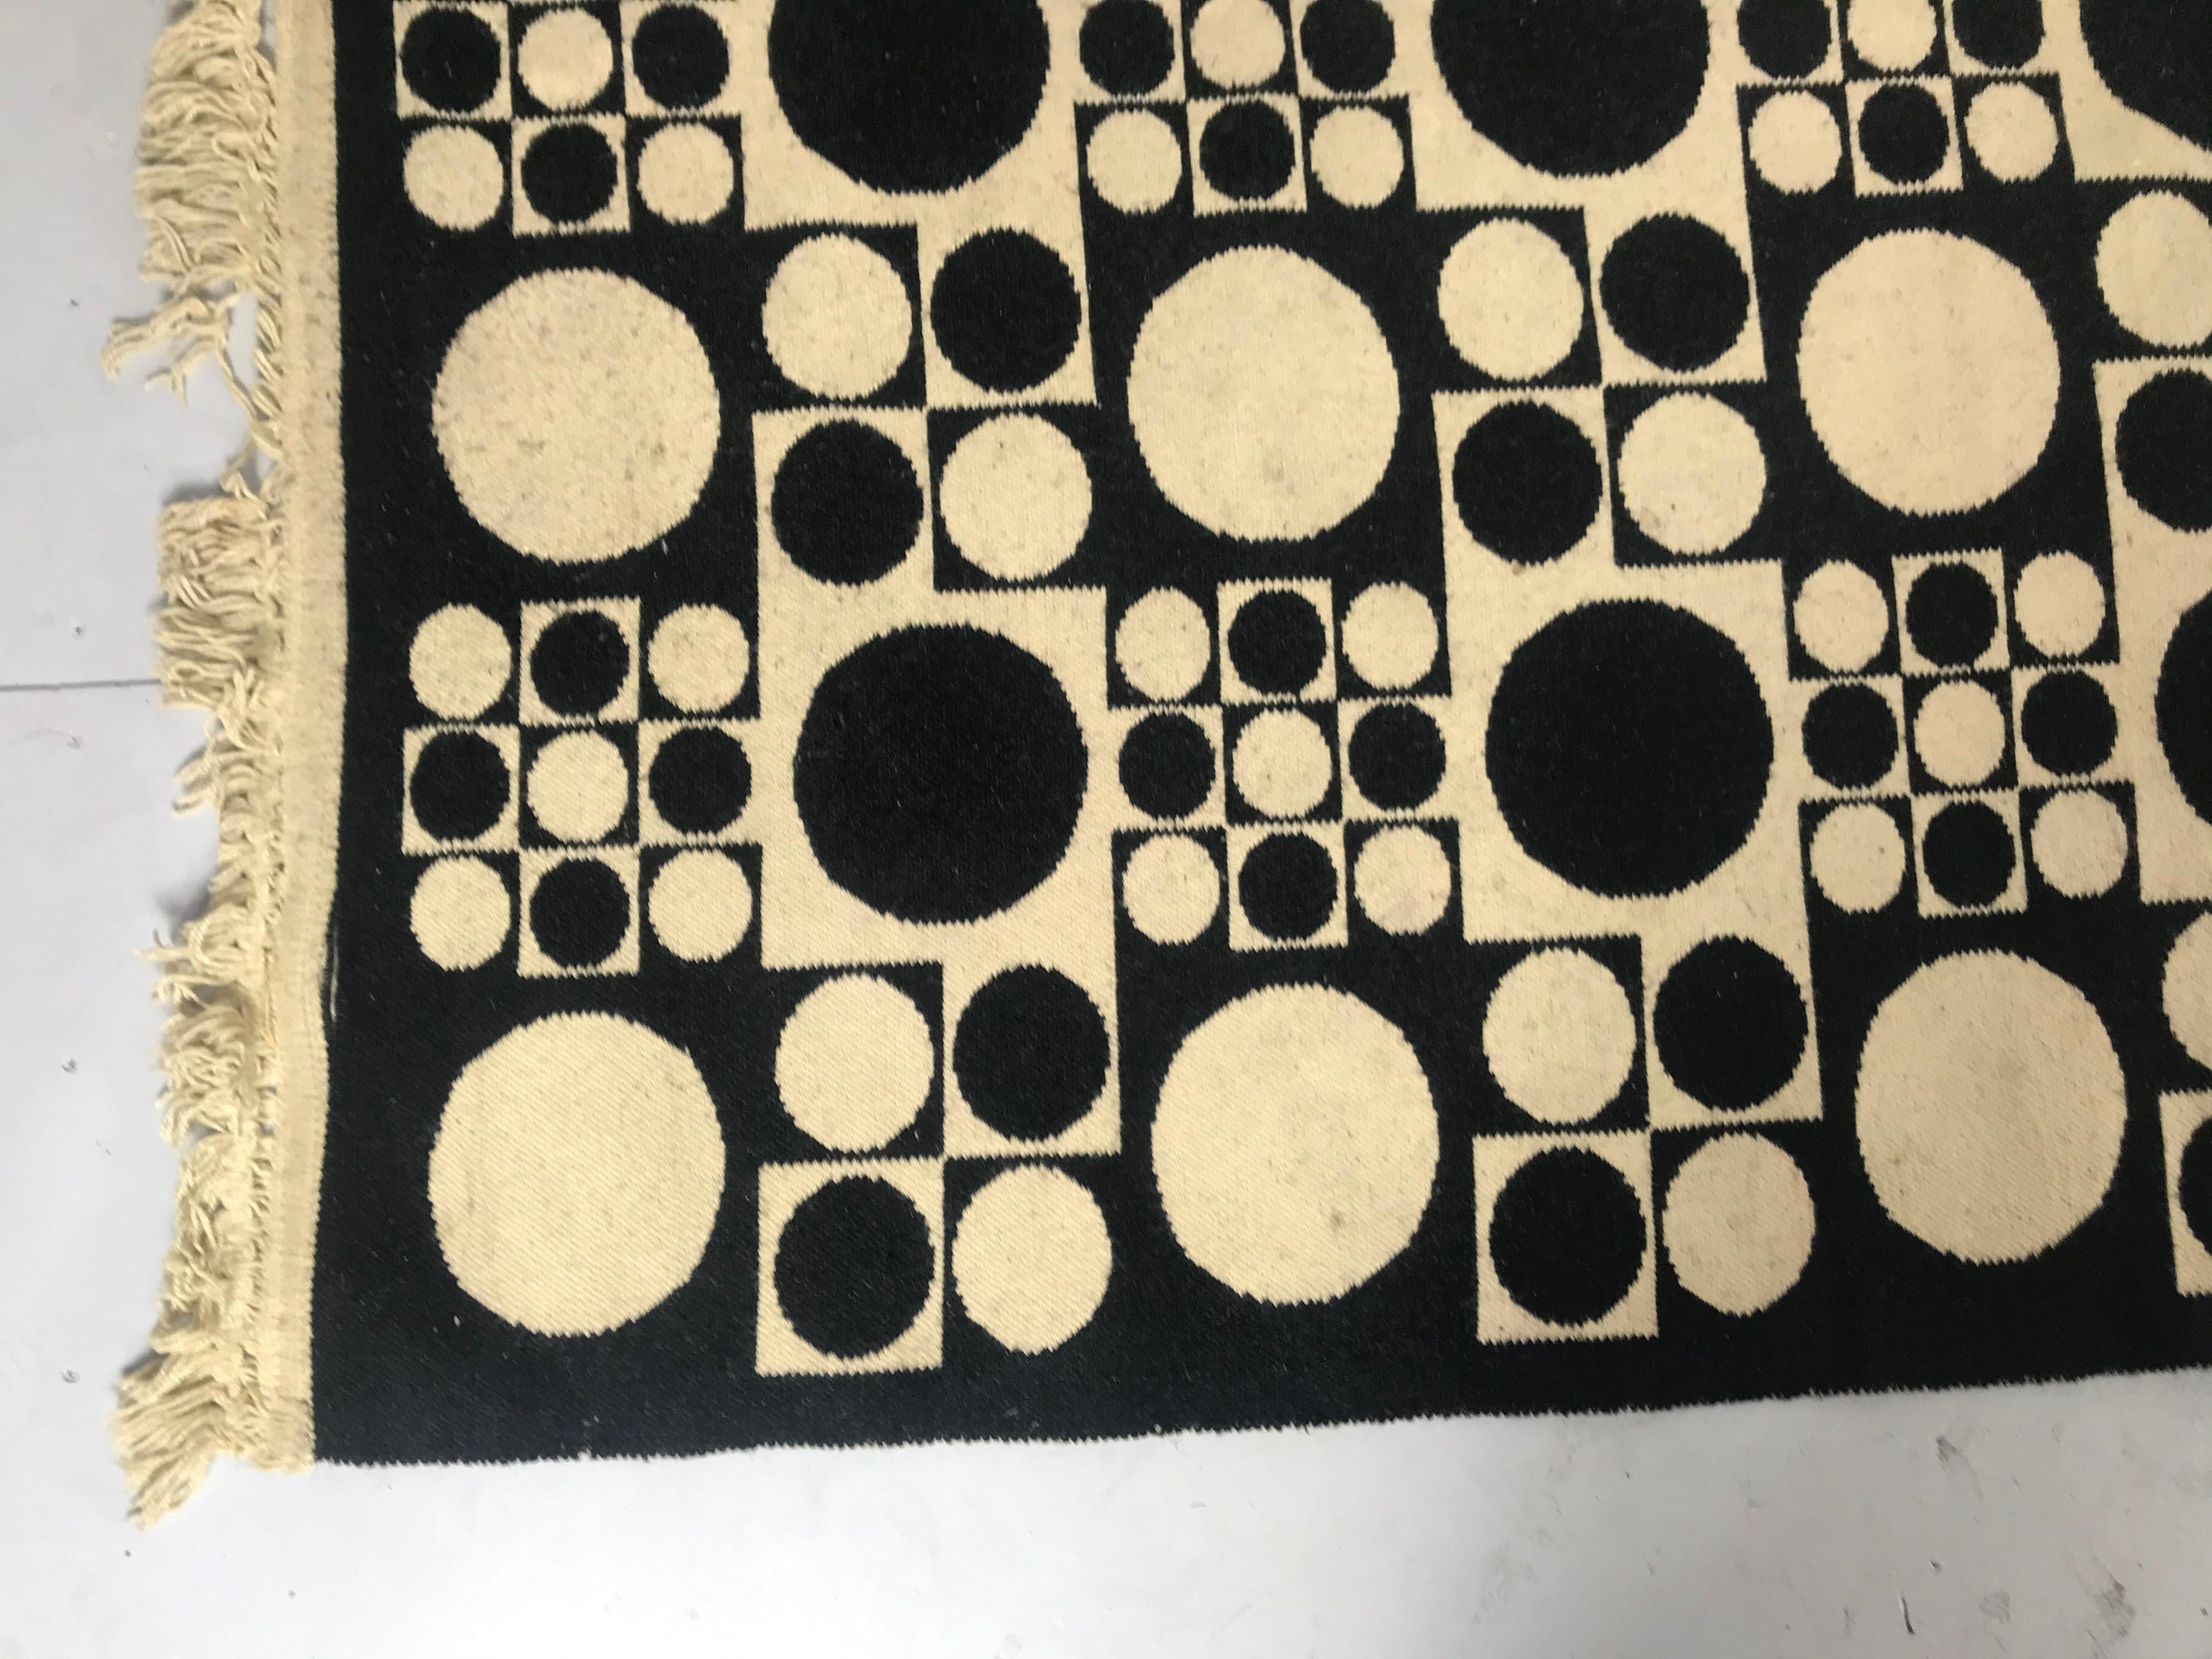 Pop modernist geometric designed rug, wall hanging by Verner Panton, minor wear, staining, have not had professionally cleaned, Classic 1970s Panton design.